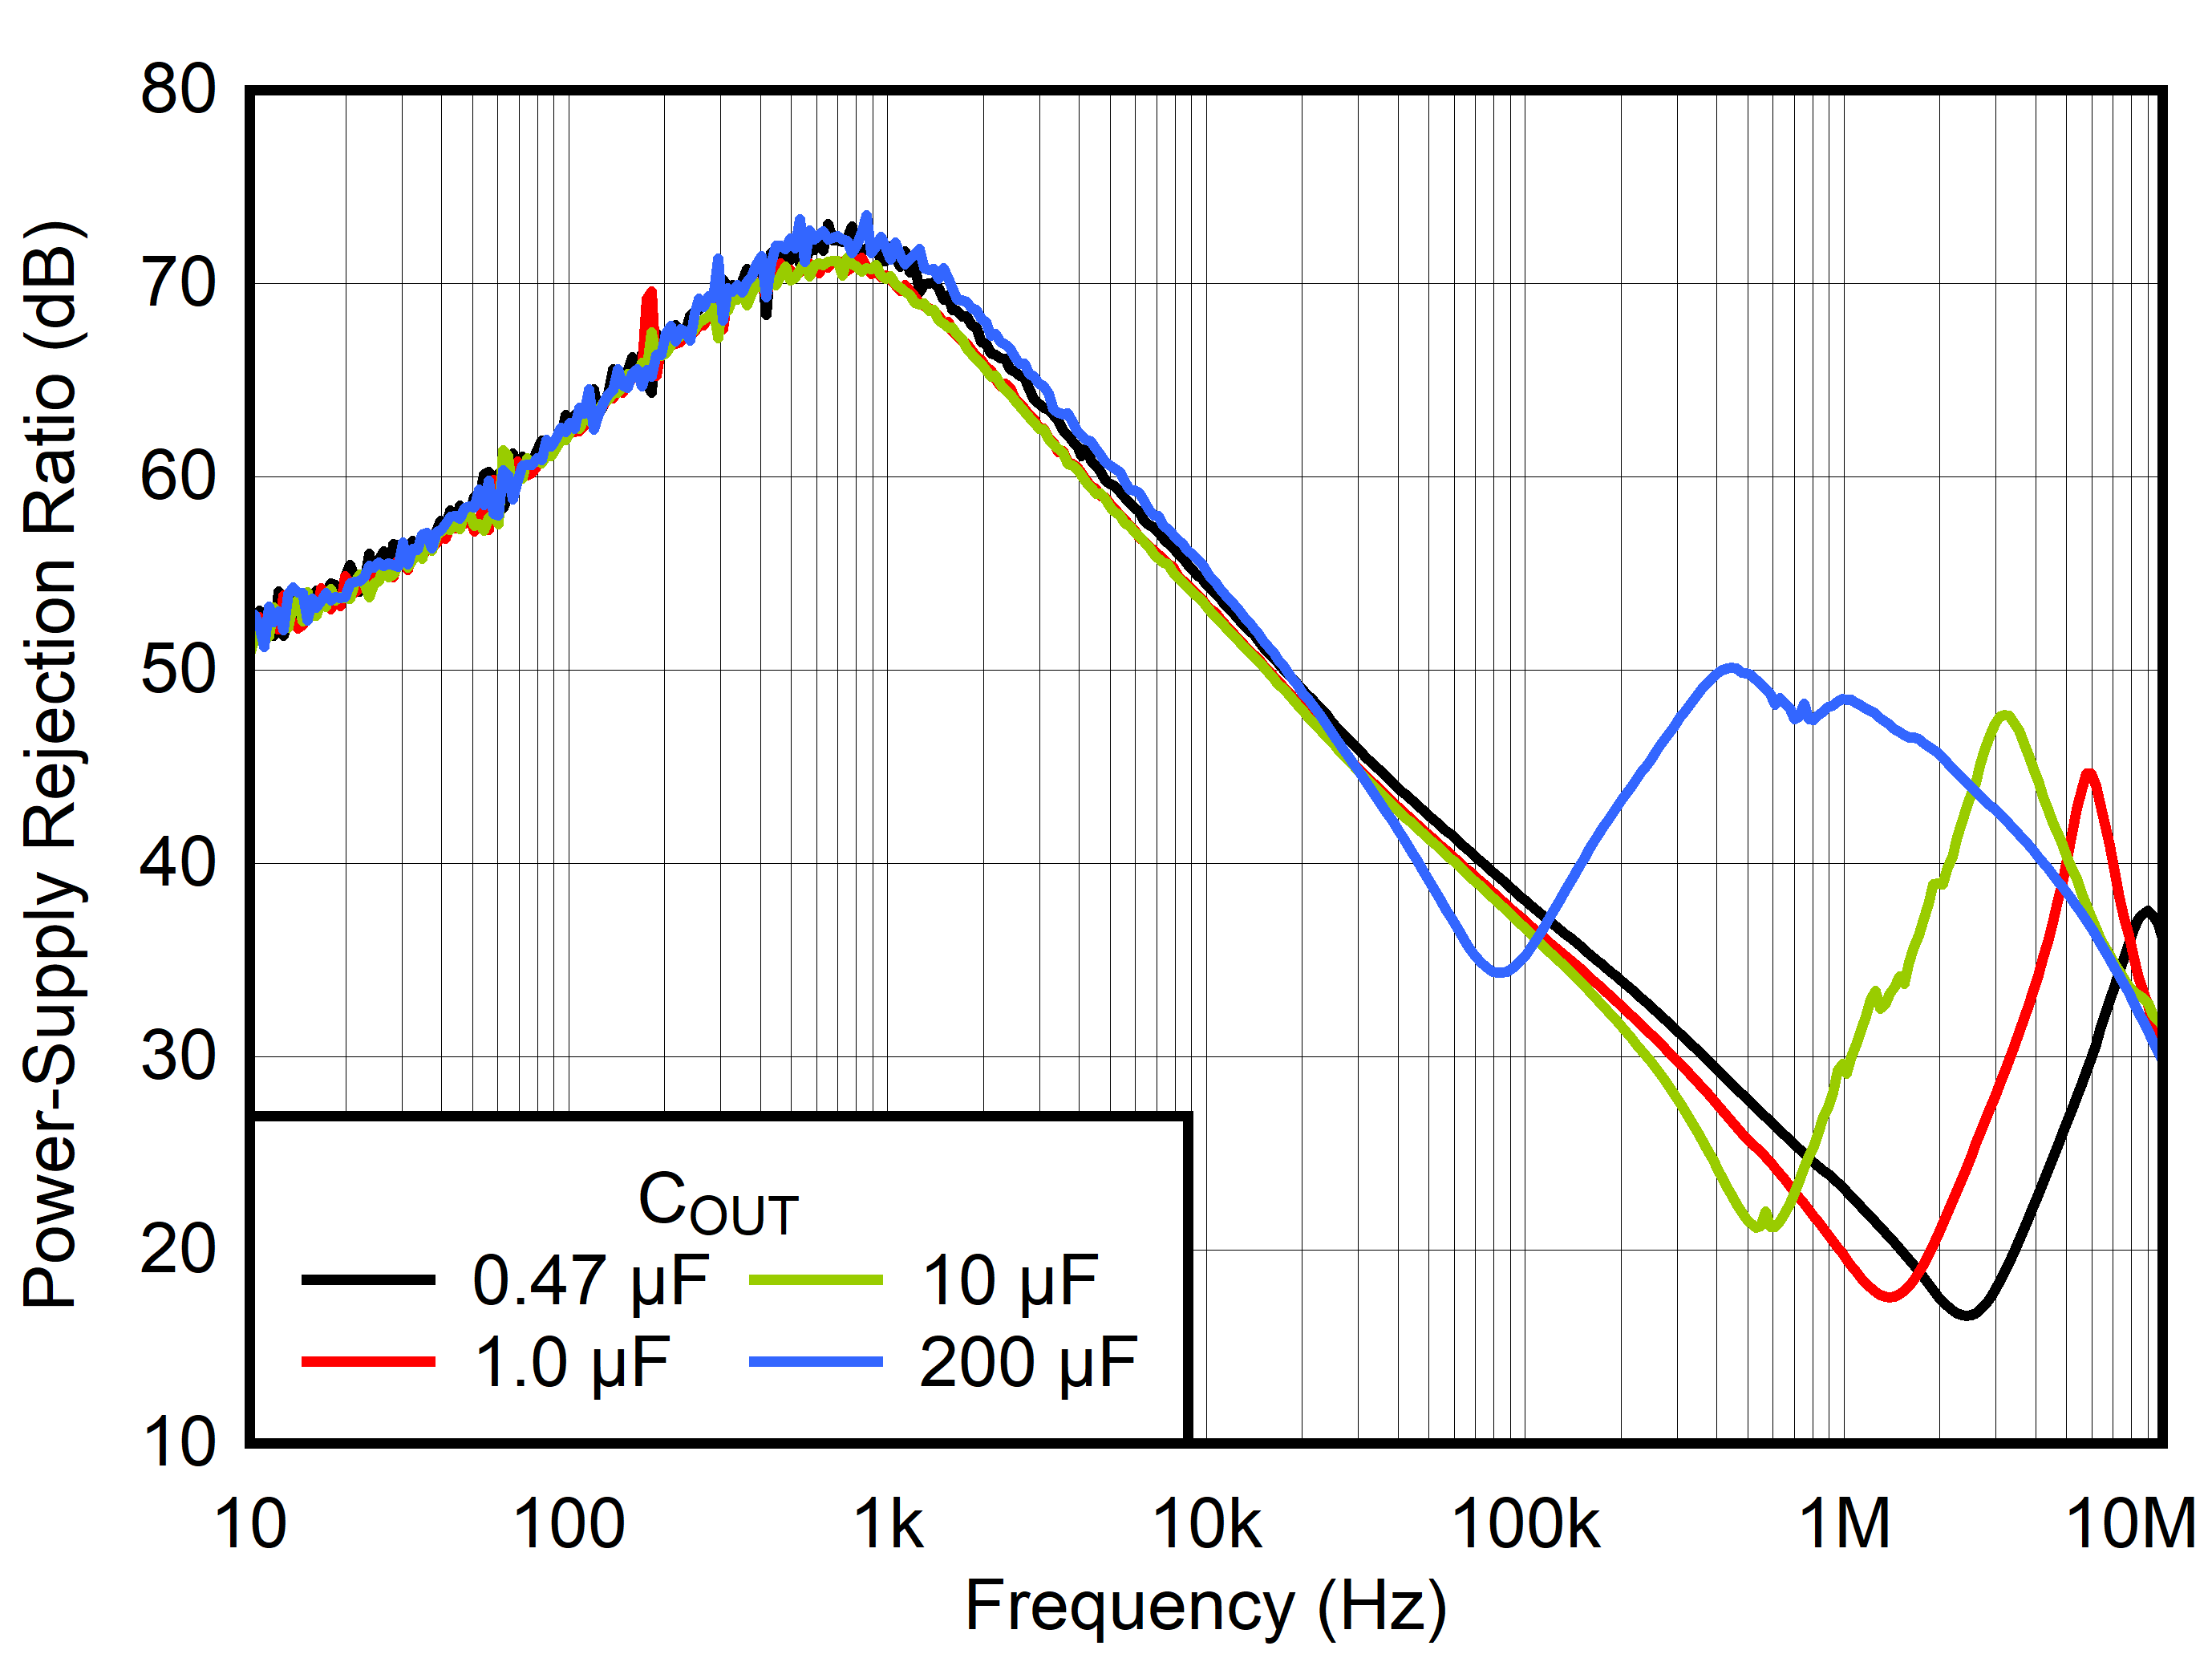 TPS7A21-Q1 PSRR
                        vs Frequency and COUT